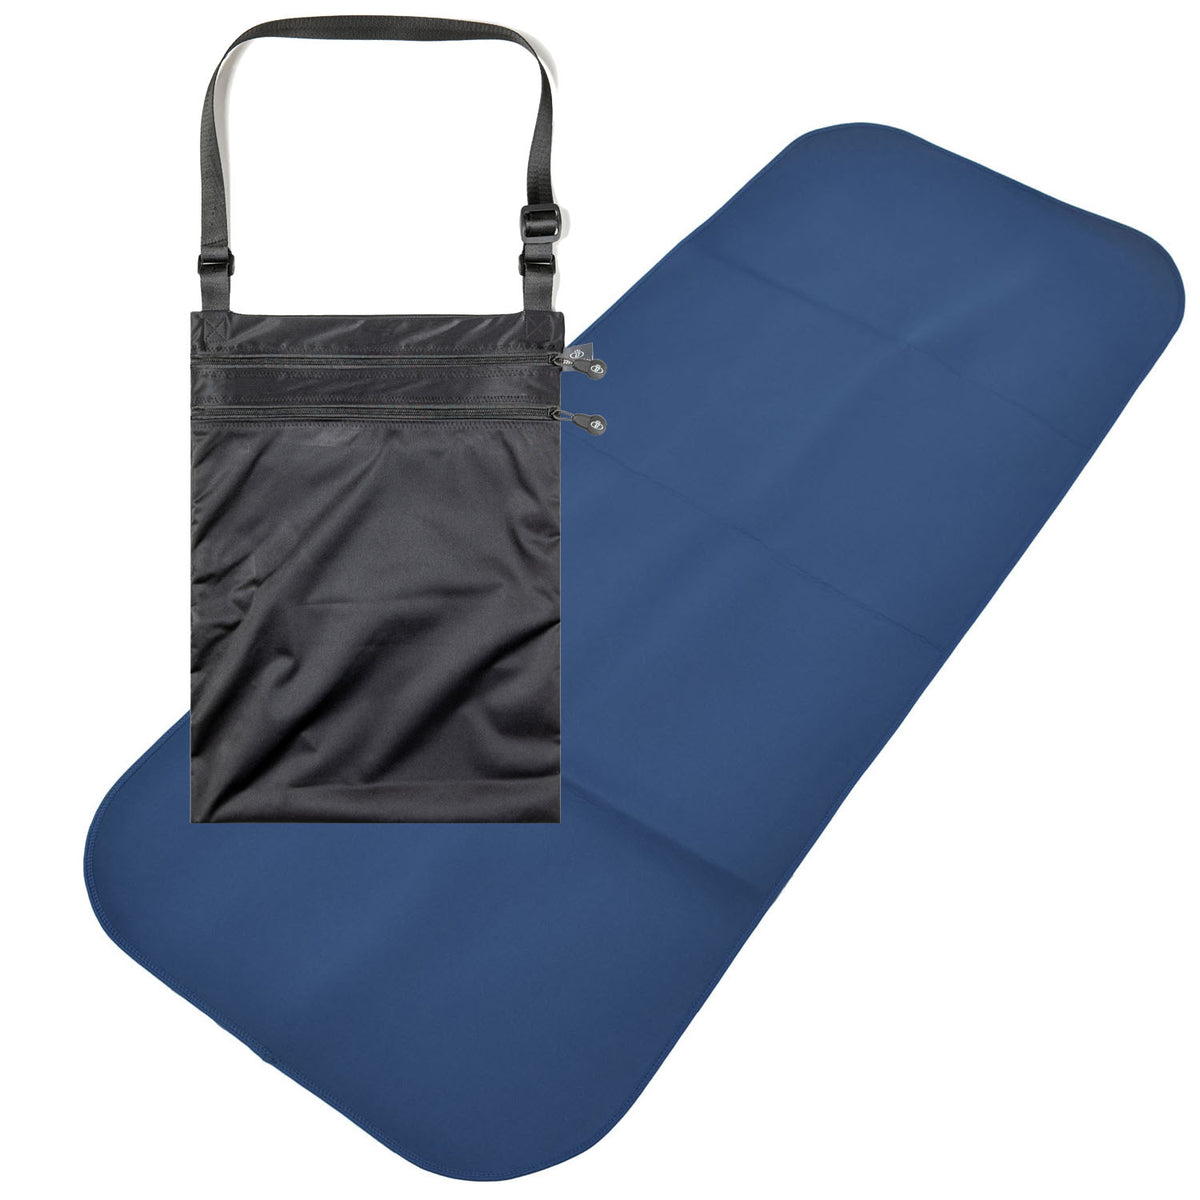 Adult and Teenager Changing Mat and WaterProof Bag Set - Steel Blue/Black | Incontinence Aids | Care Designs